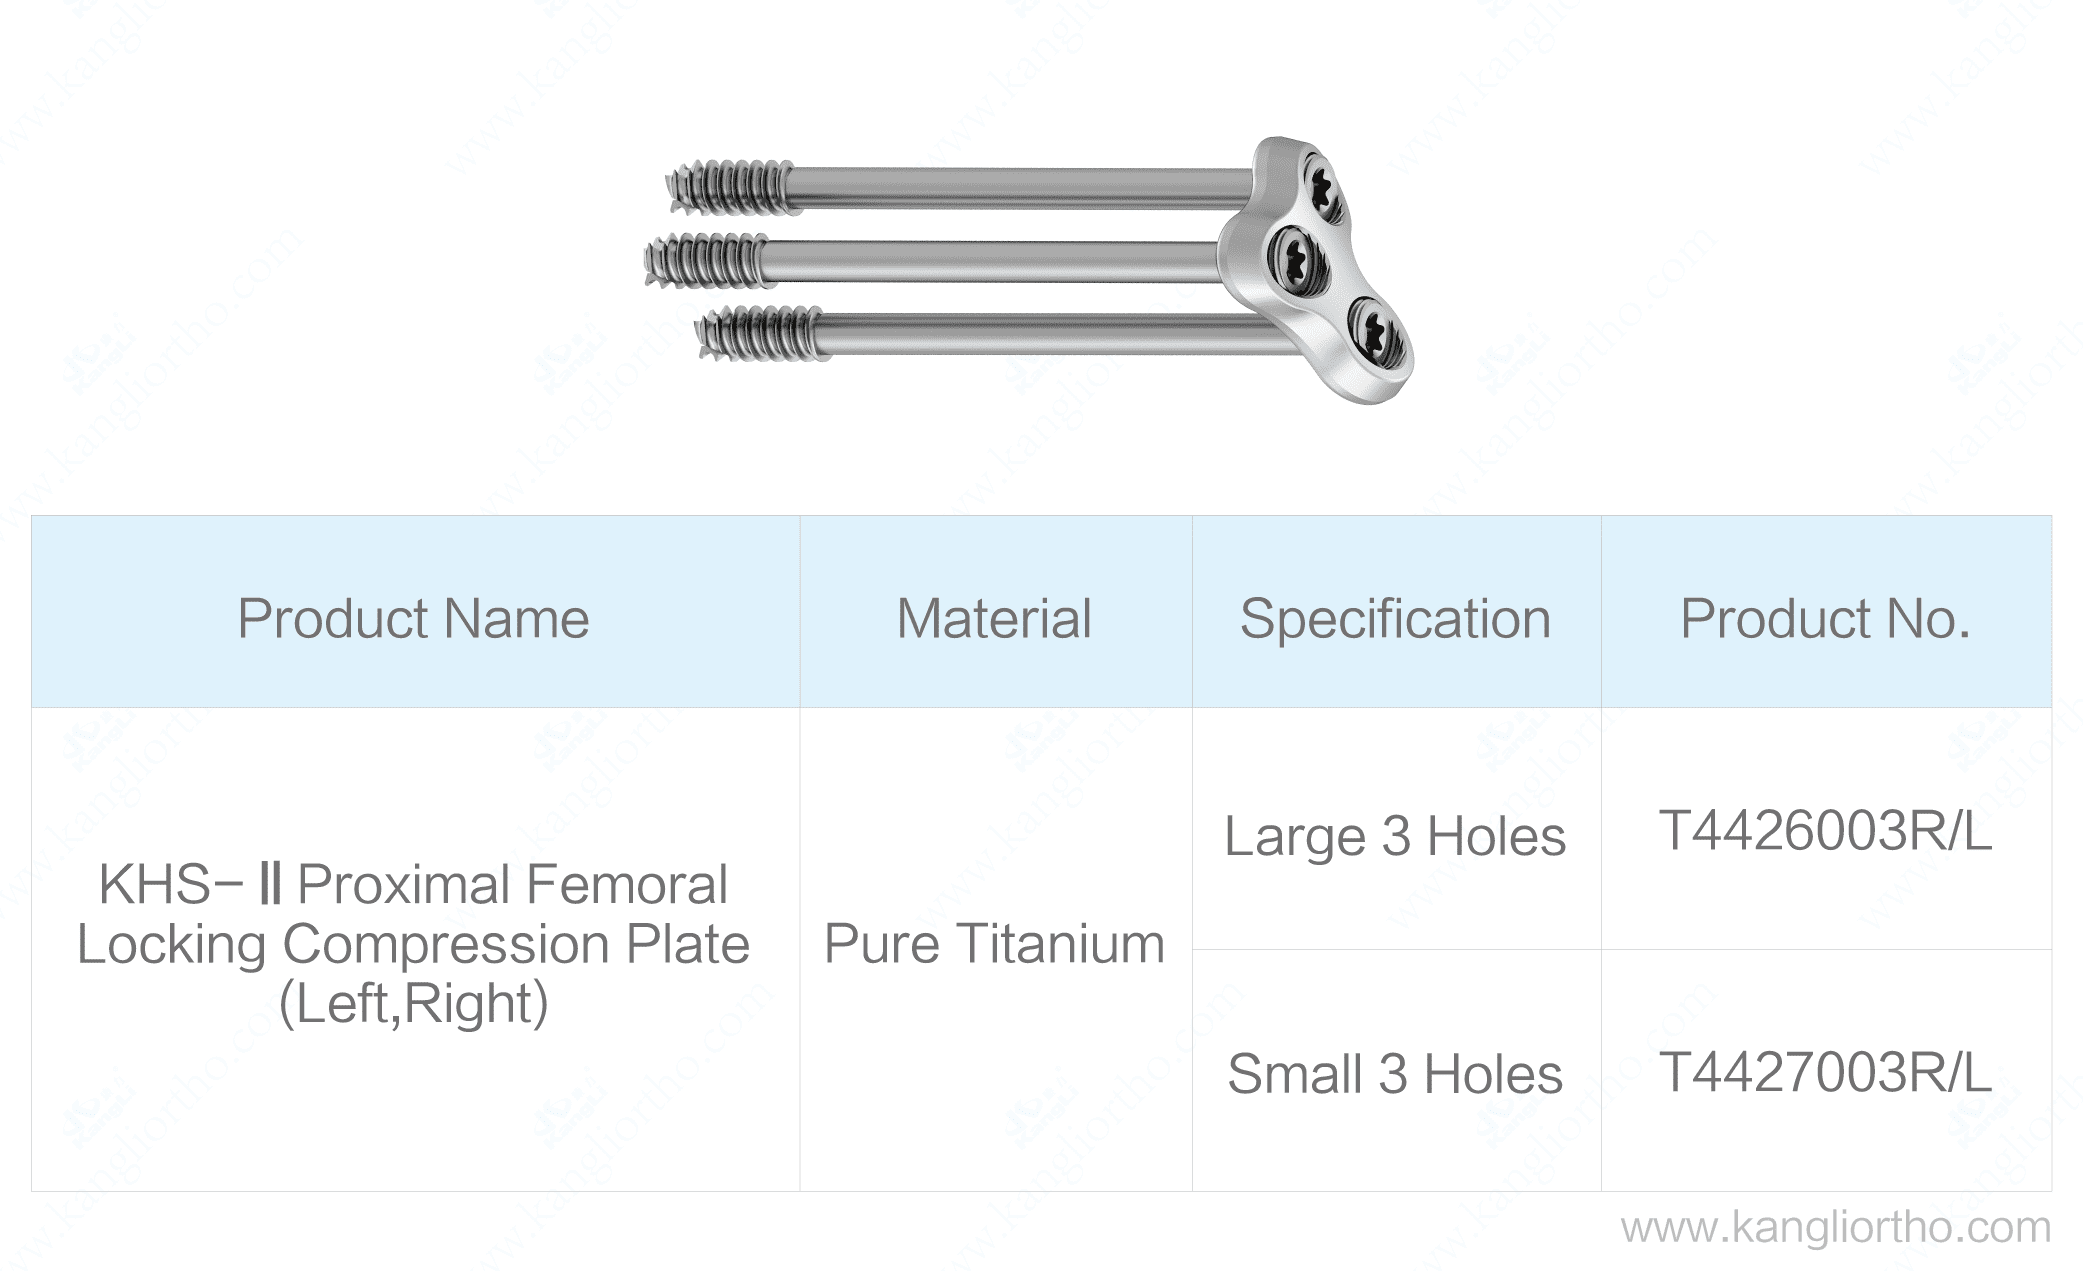 khs-ii-proximal-femoral-locking-compression-plate-small-specifications